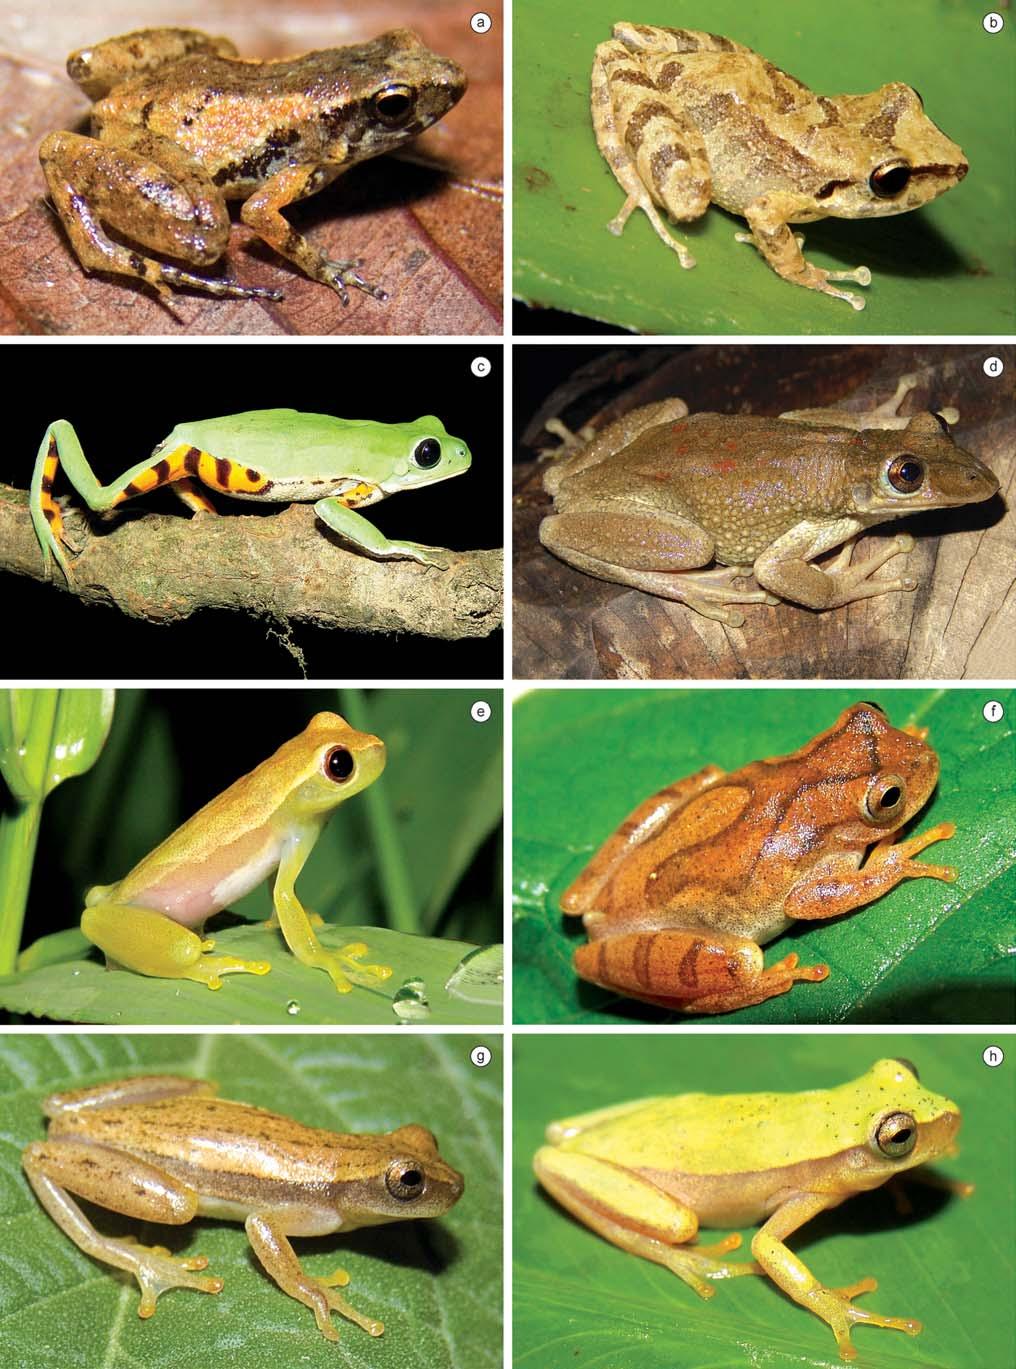 Biota Neotrop., vol. 10, no. 3 233 Amphibians and reptiles from a highly diverse area of the Caatinga domain Figure 3. Amphibian species found in the region of CPI.